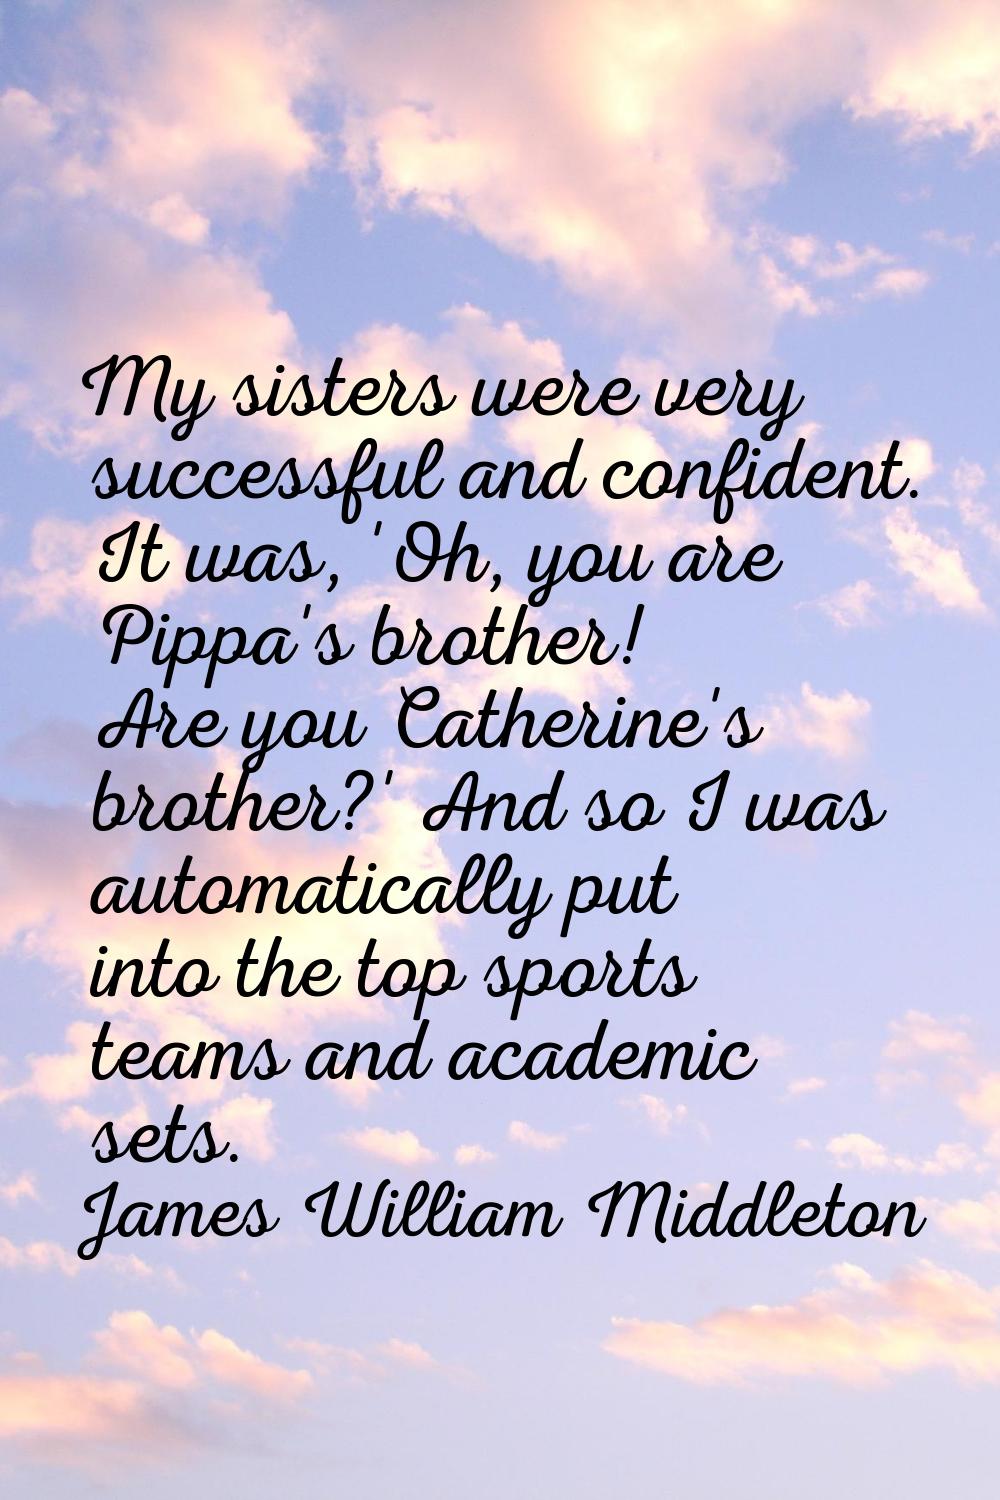 My sisters were very successful and confident. It was, 'Oh, you are Pippa's brother! Are you Cather